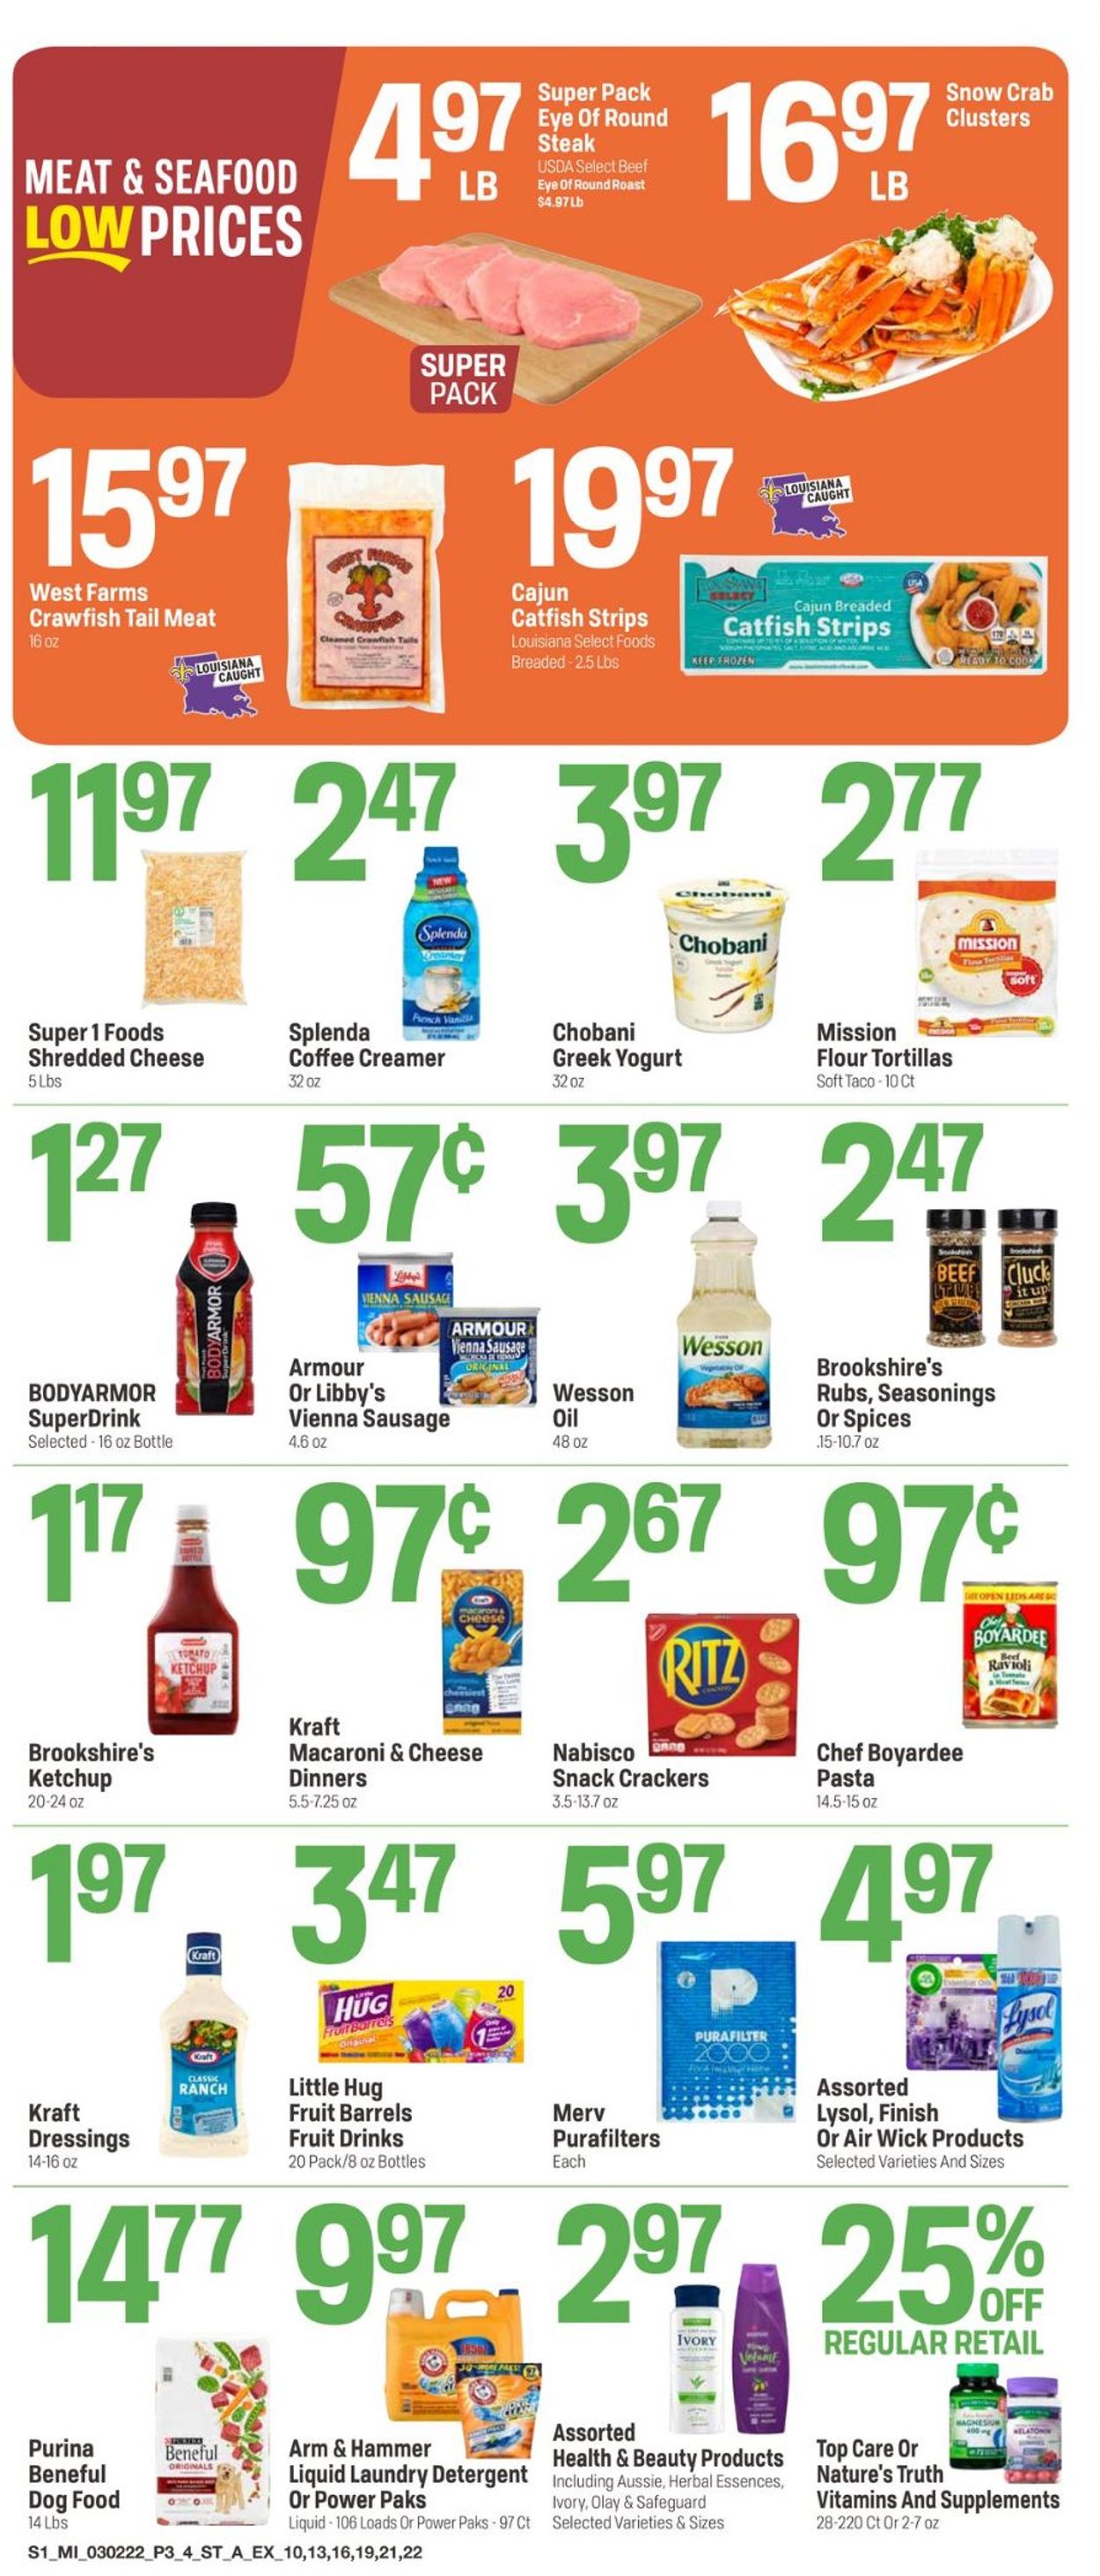 Catalogue Super 1 Foods from 03/02/2022